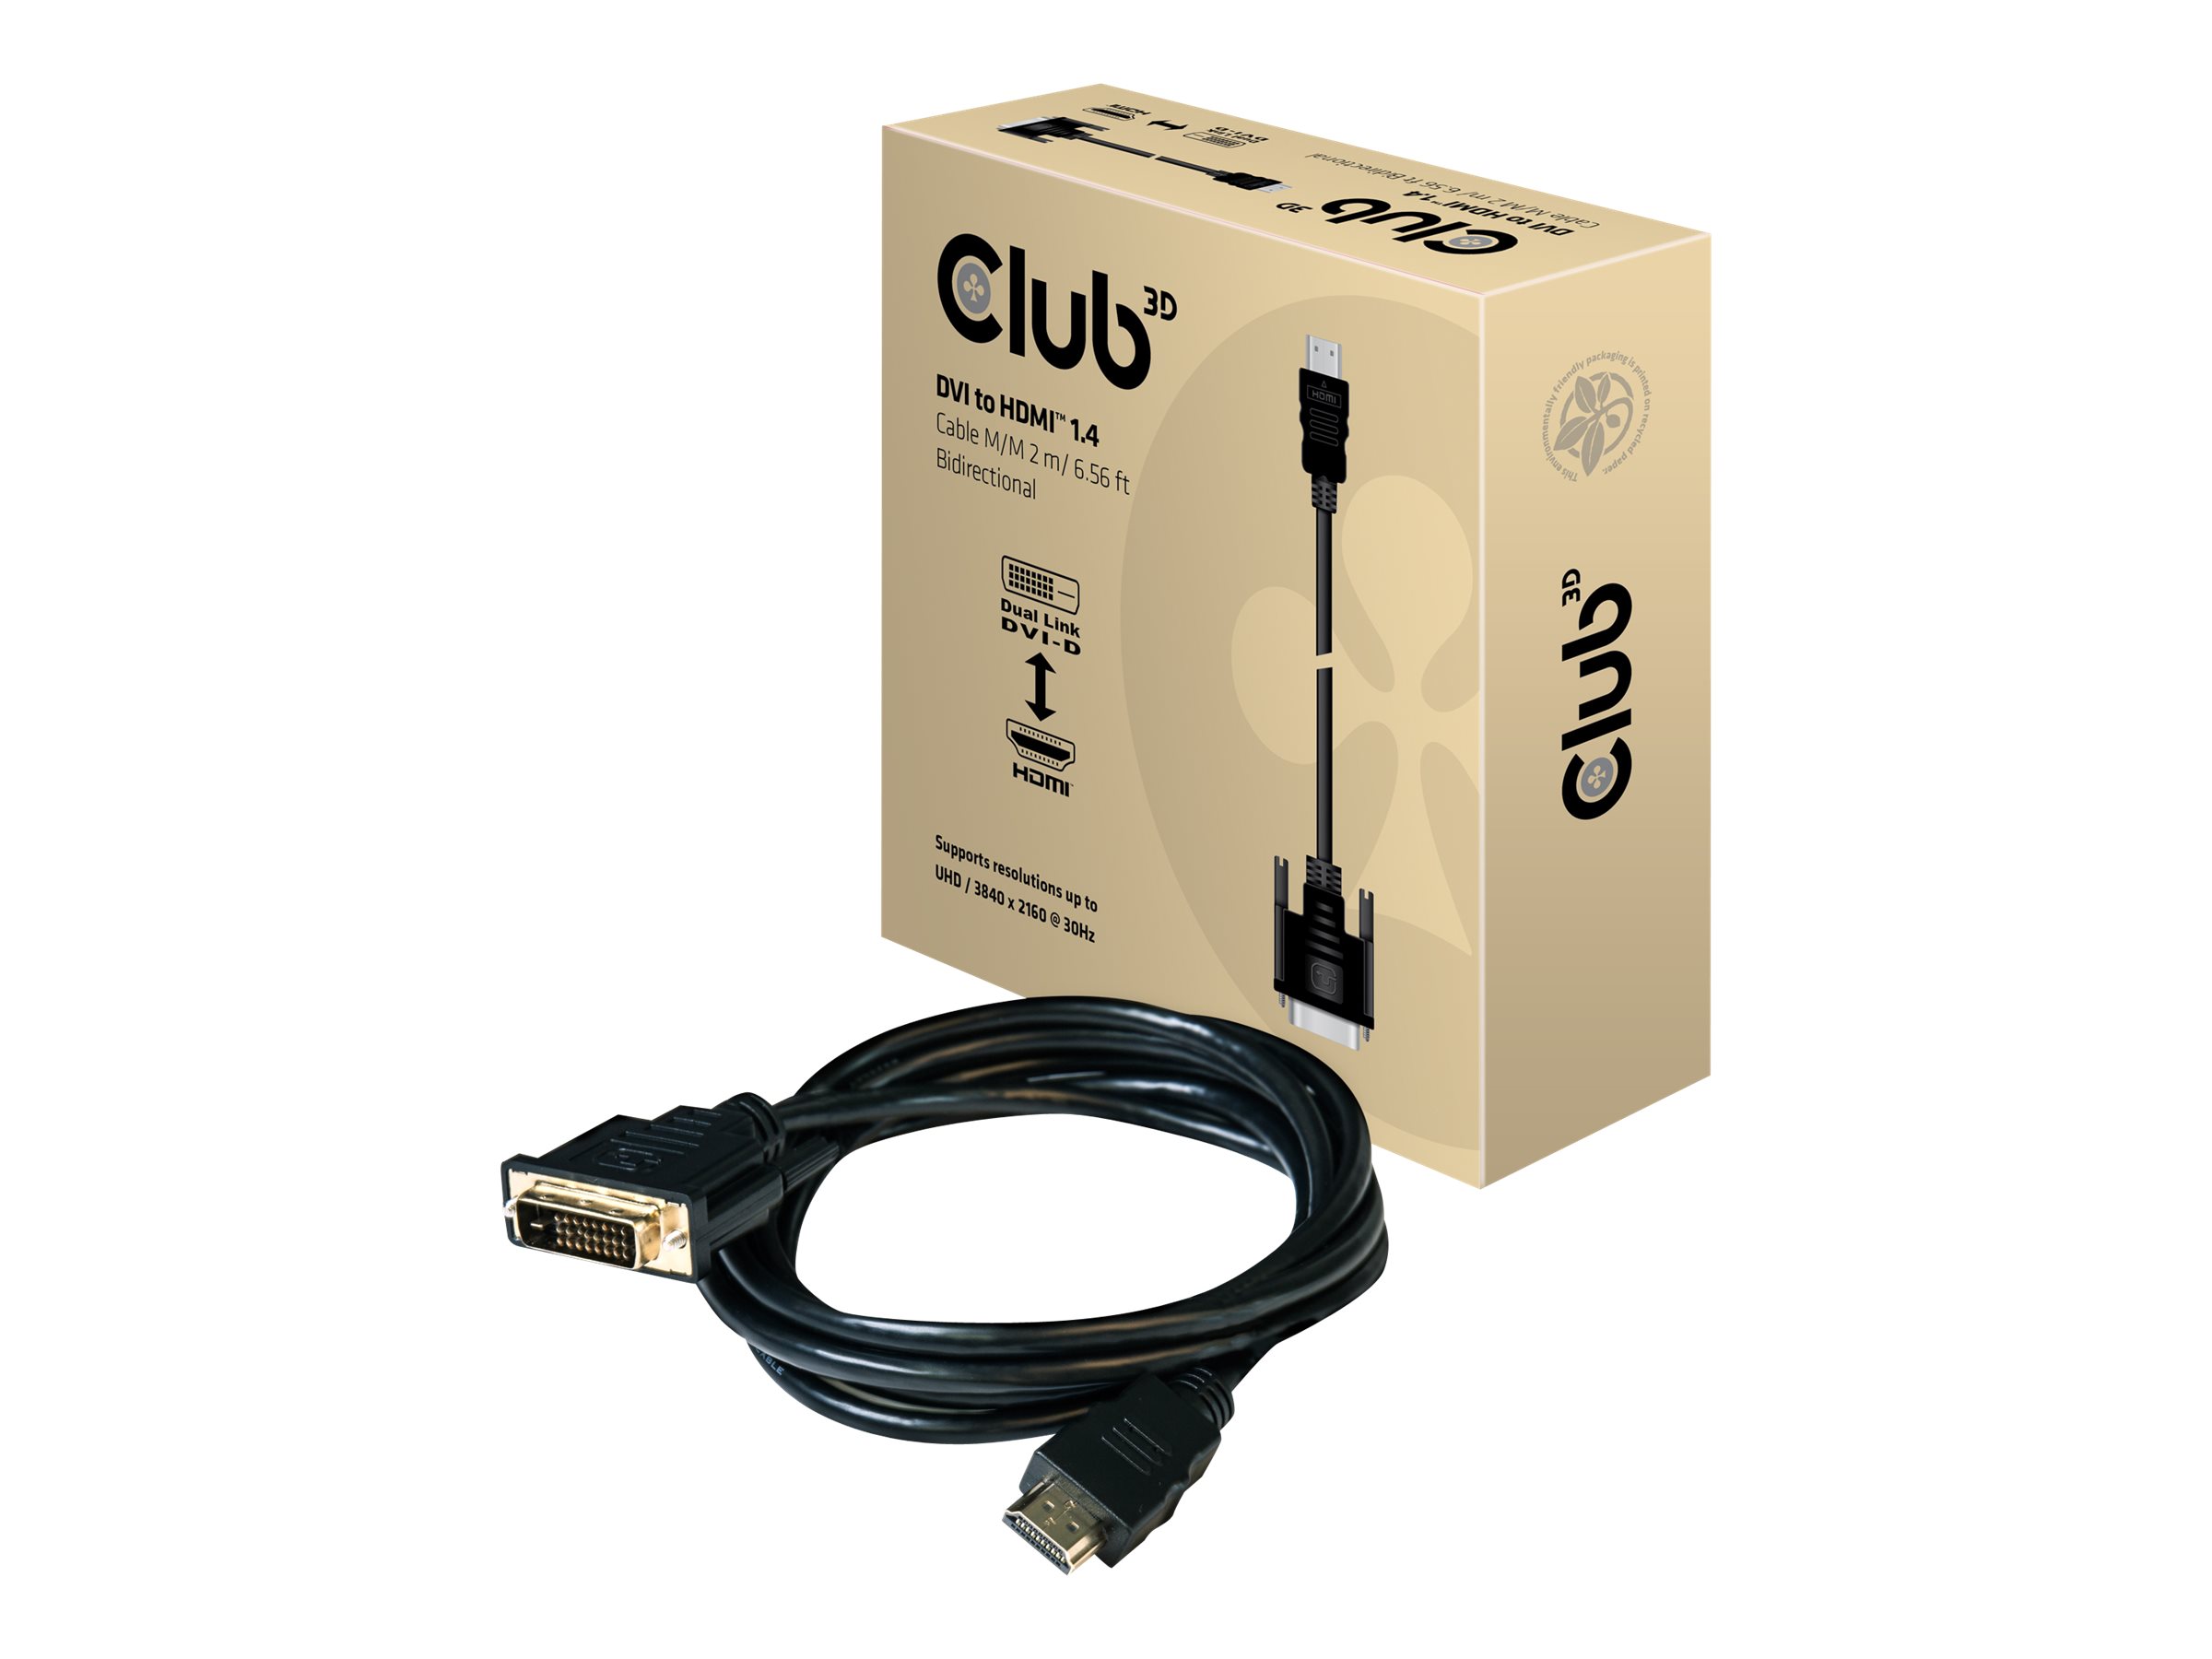 Club 3D CAC-1210 - Adapter cable - Dual Link